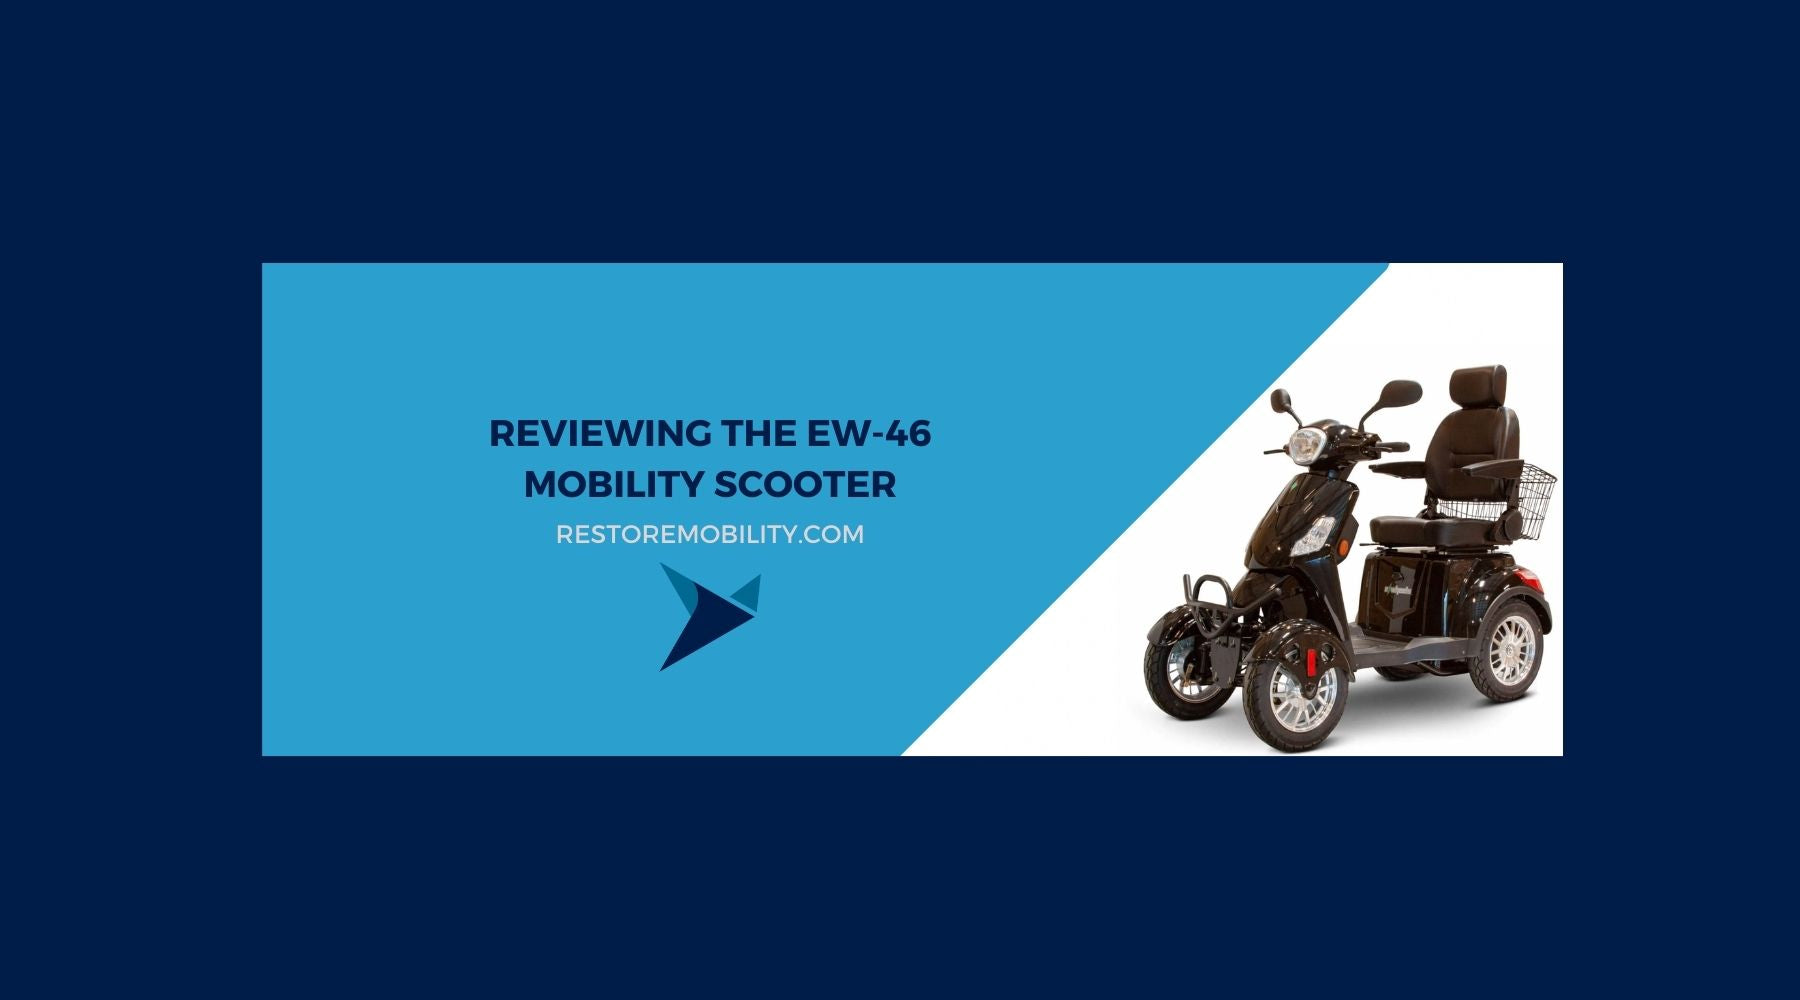 Reviewing the EW-46 Mobility Scooter by EWheels